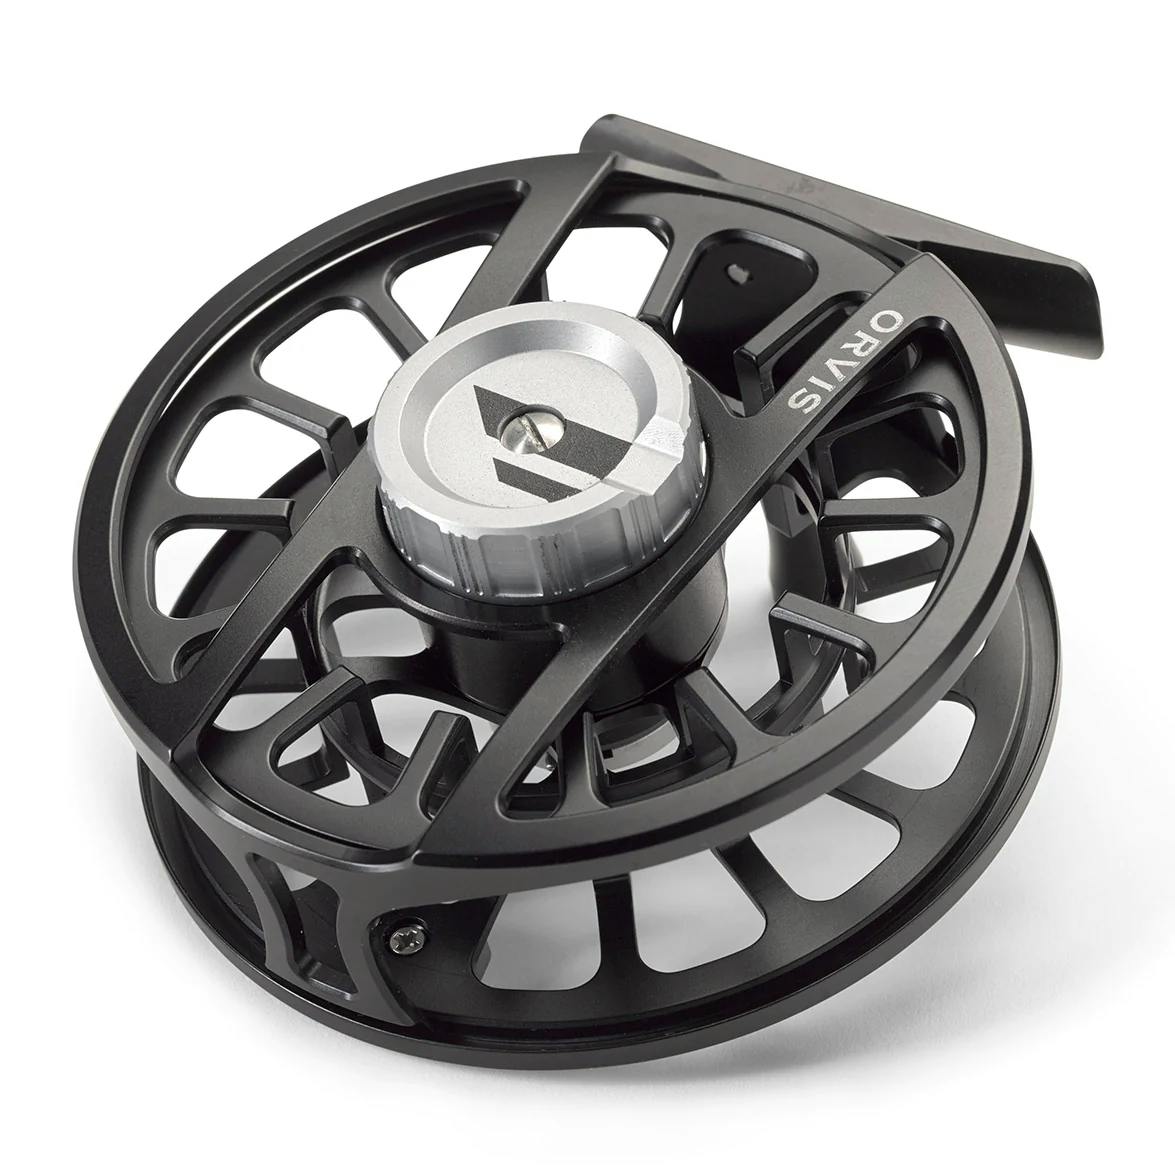 Orvis Reel Case (4 stores) find prices • Compare today »